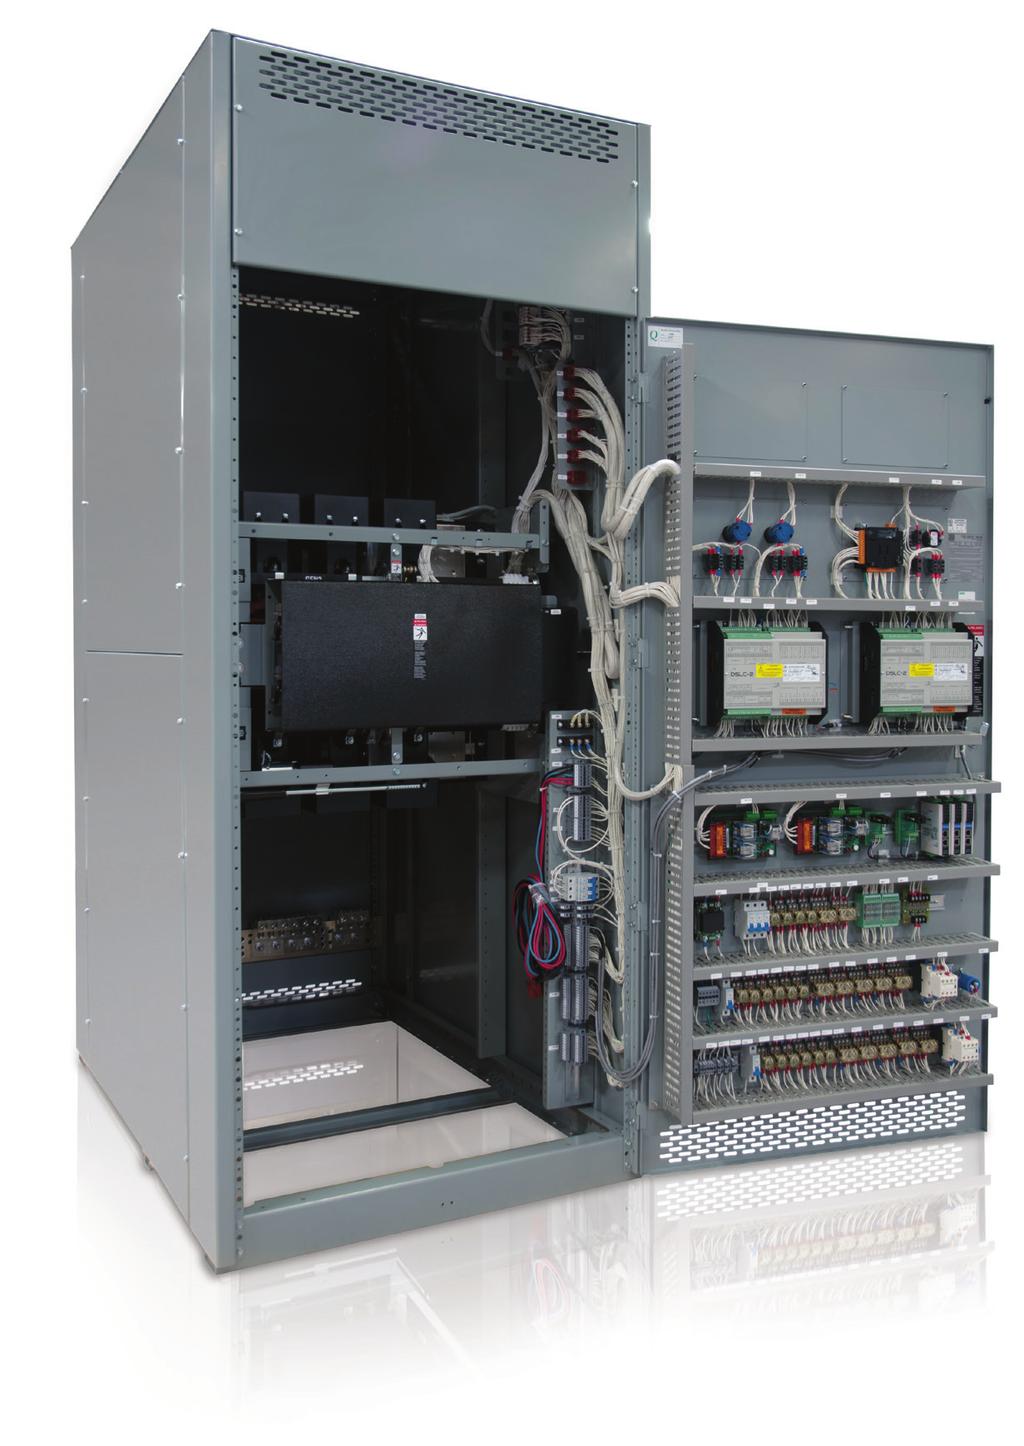 Redefining Parallel Systems ASCO SERIES 300 Generator Paralleling System Since introducing the first power transfer switch almost 100 years ago, ASCO has been committed to providing reliable and